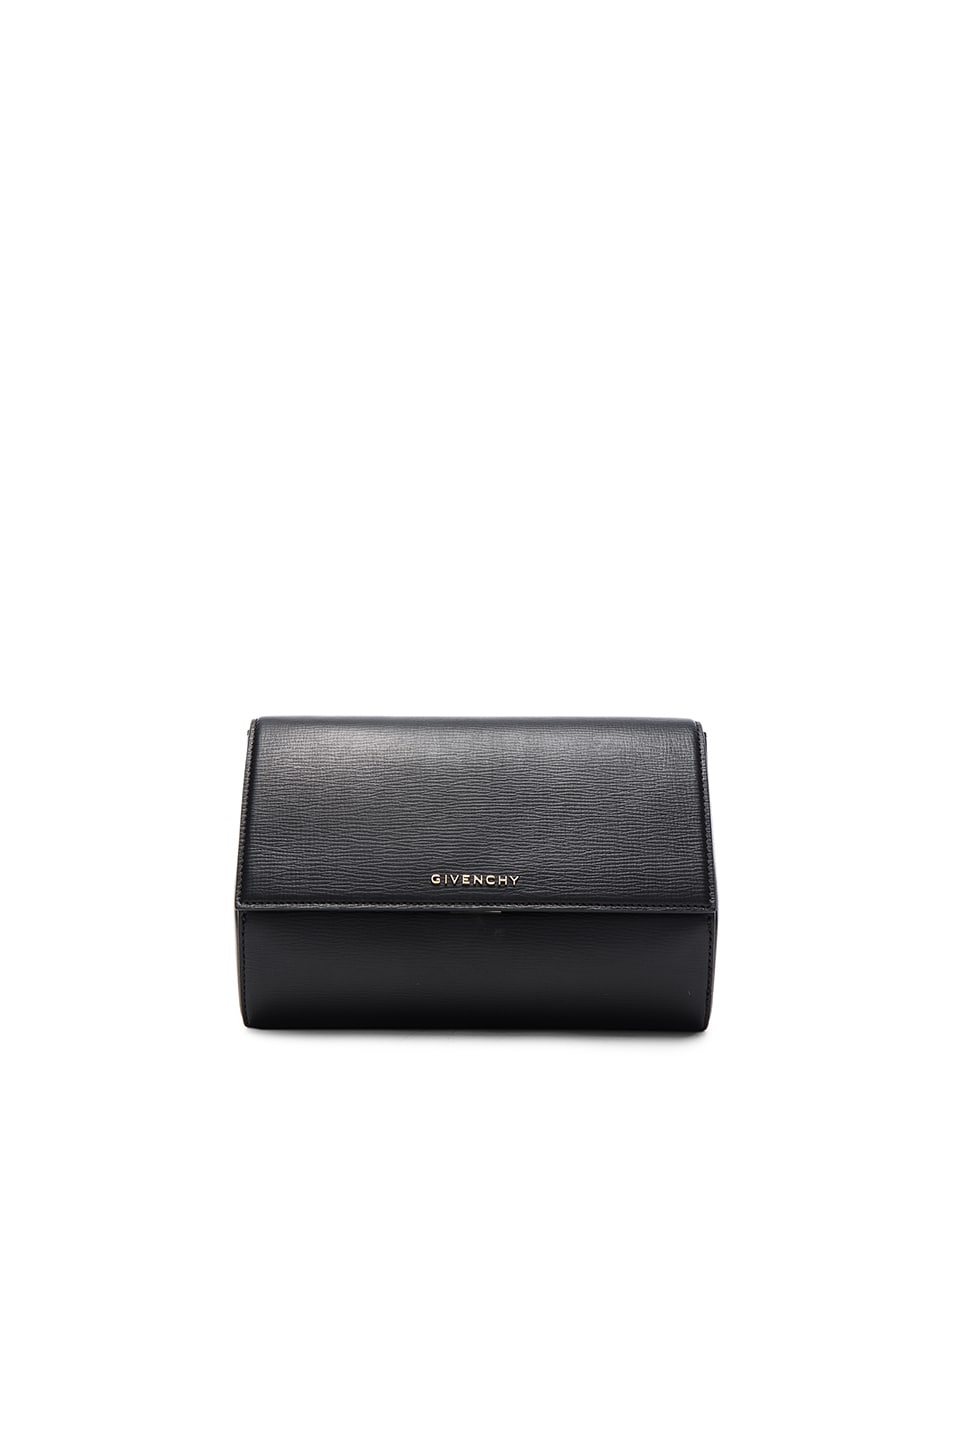 Image 1 of Givenchy Pandora Box Clutch in Black